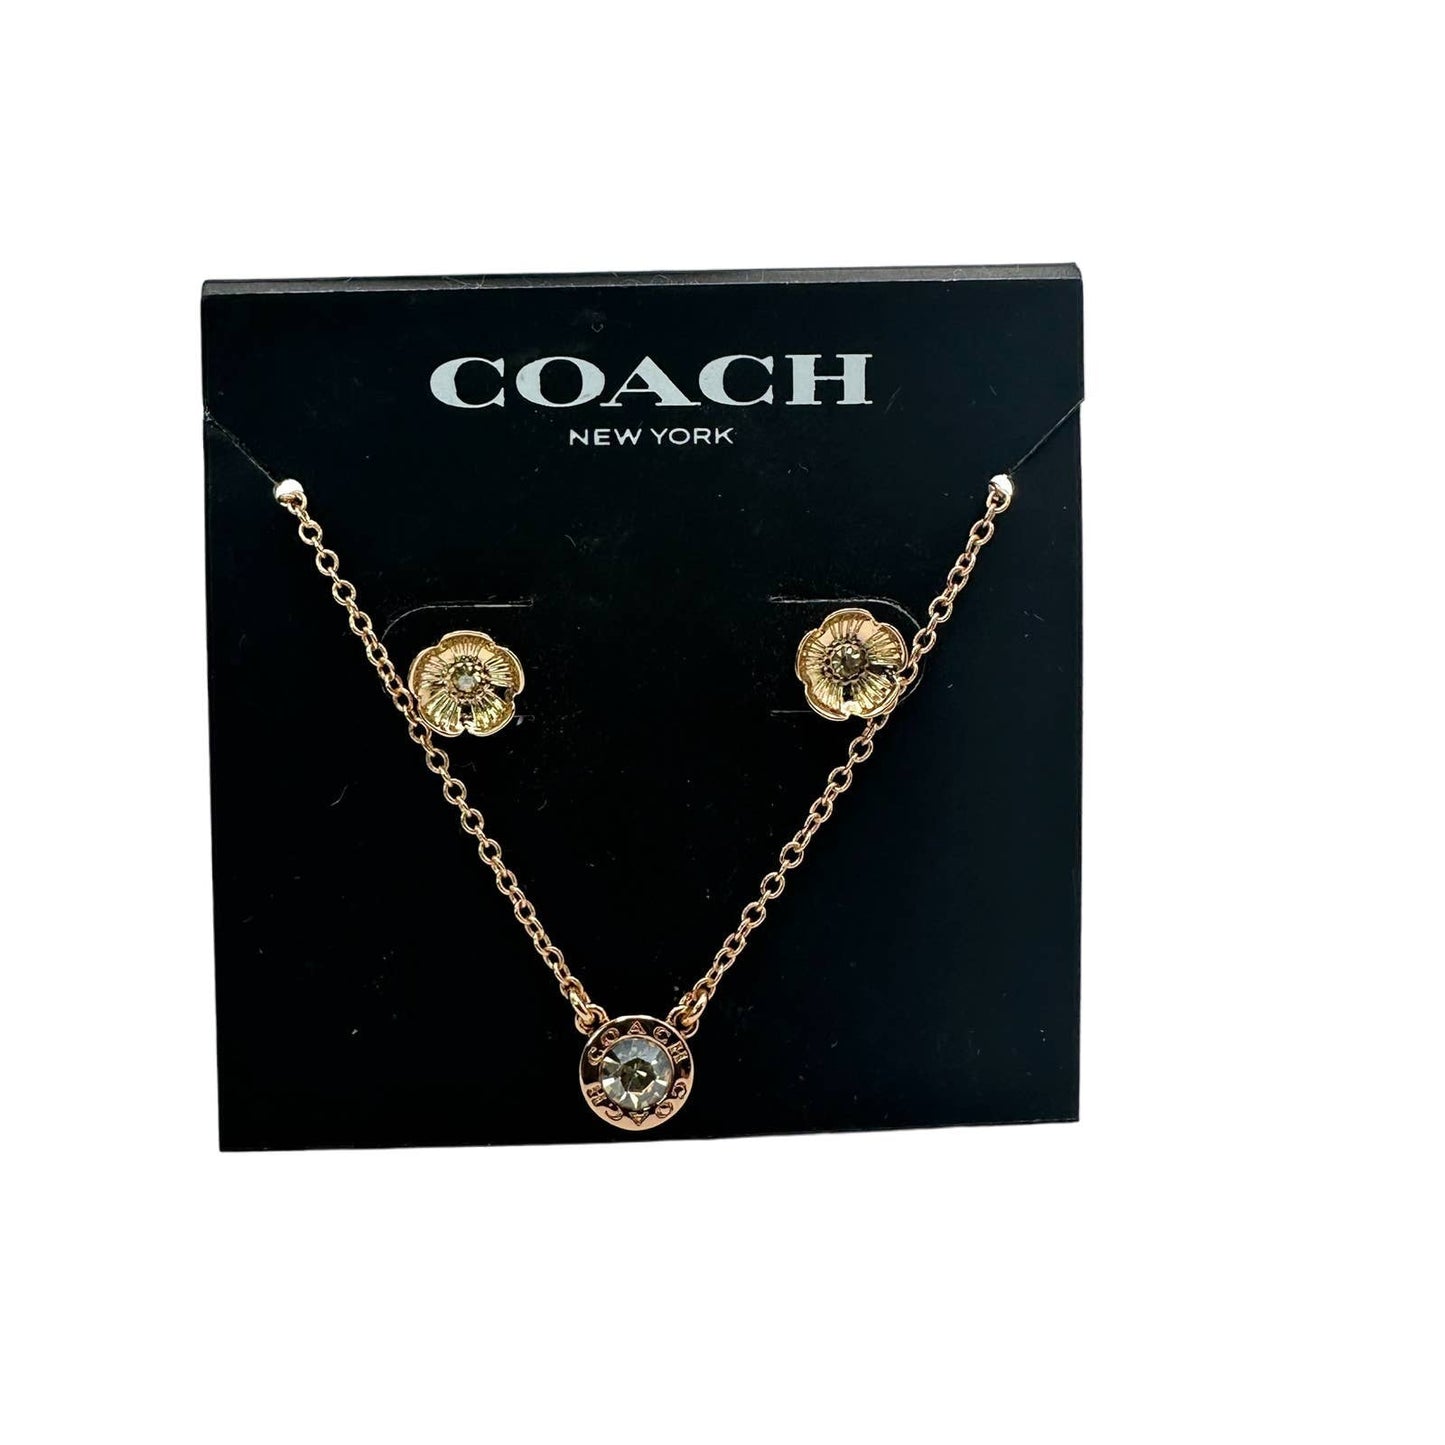 NWT COACH Signature Rose Gold Tone Floral Earrings Studs and Necklace Set